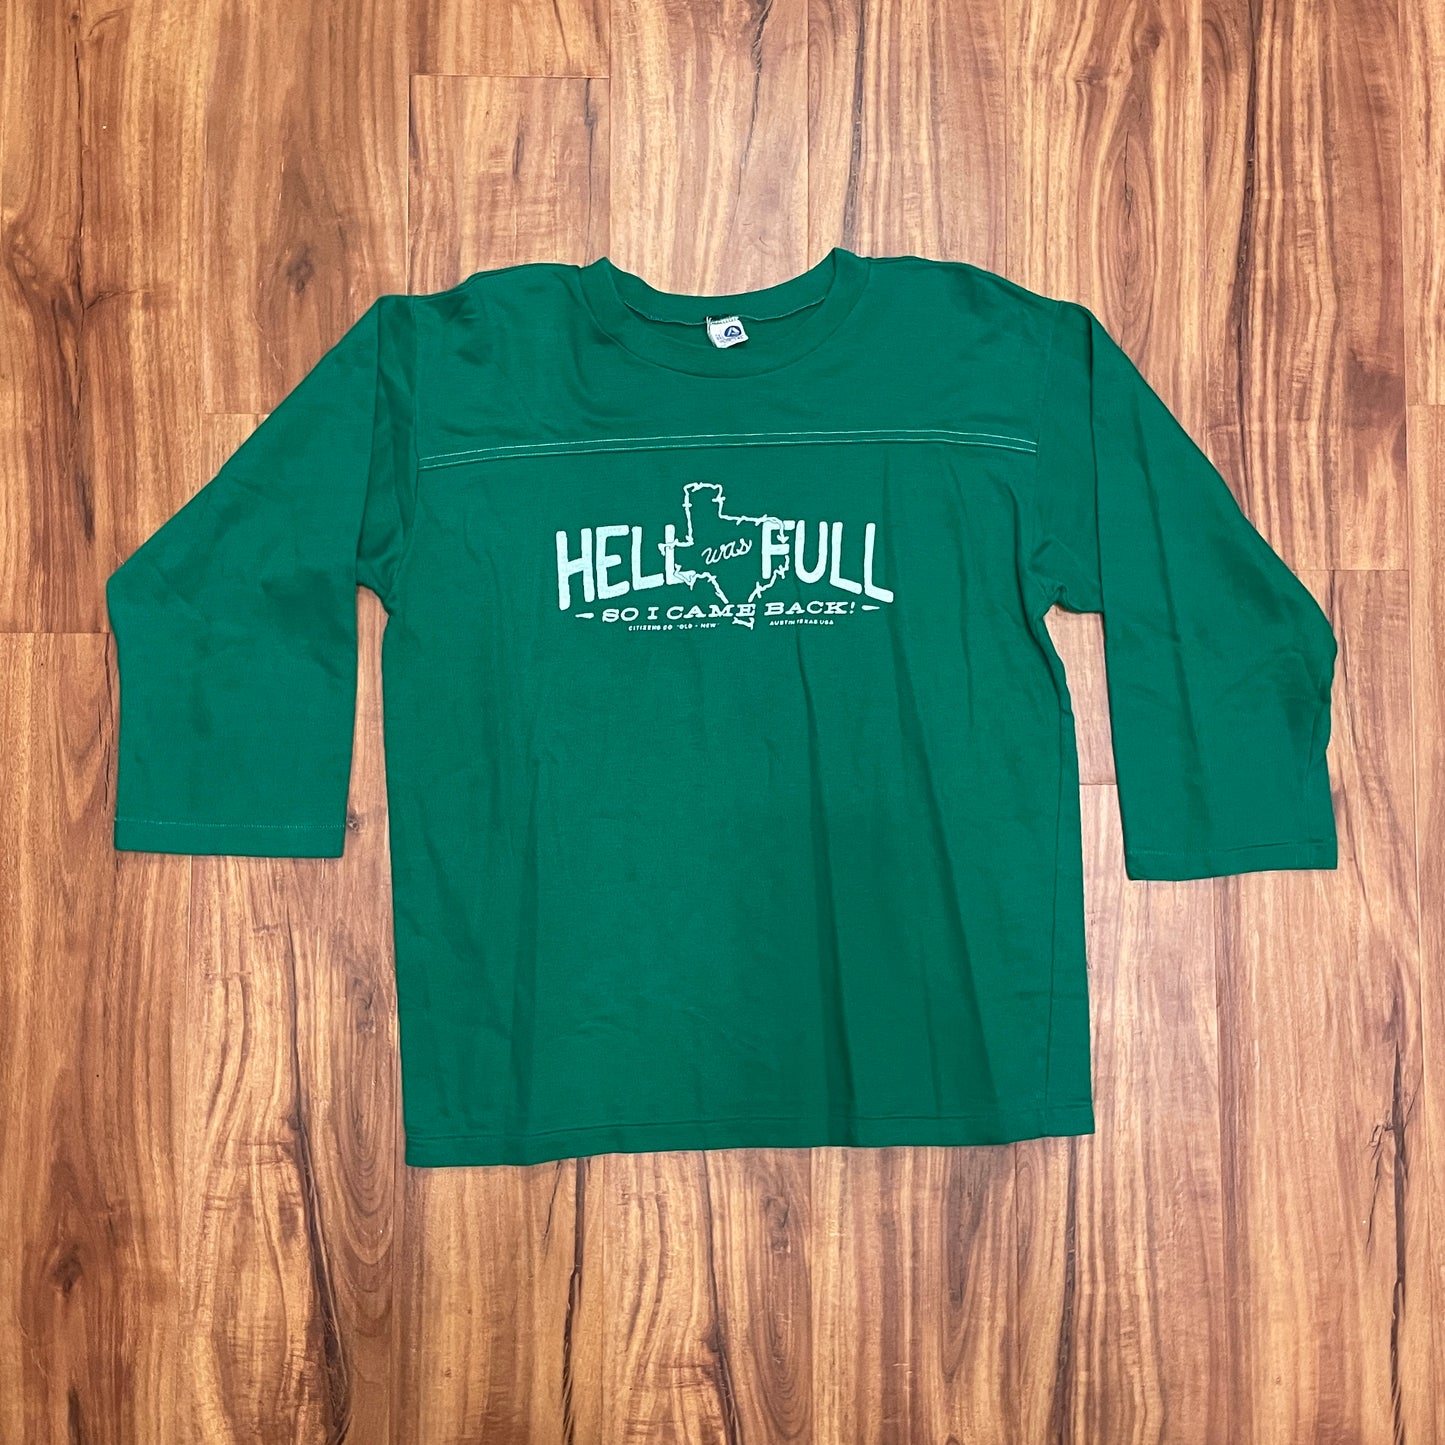 Citizens "Hell was Full" Jersey [L]